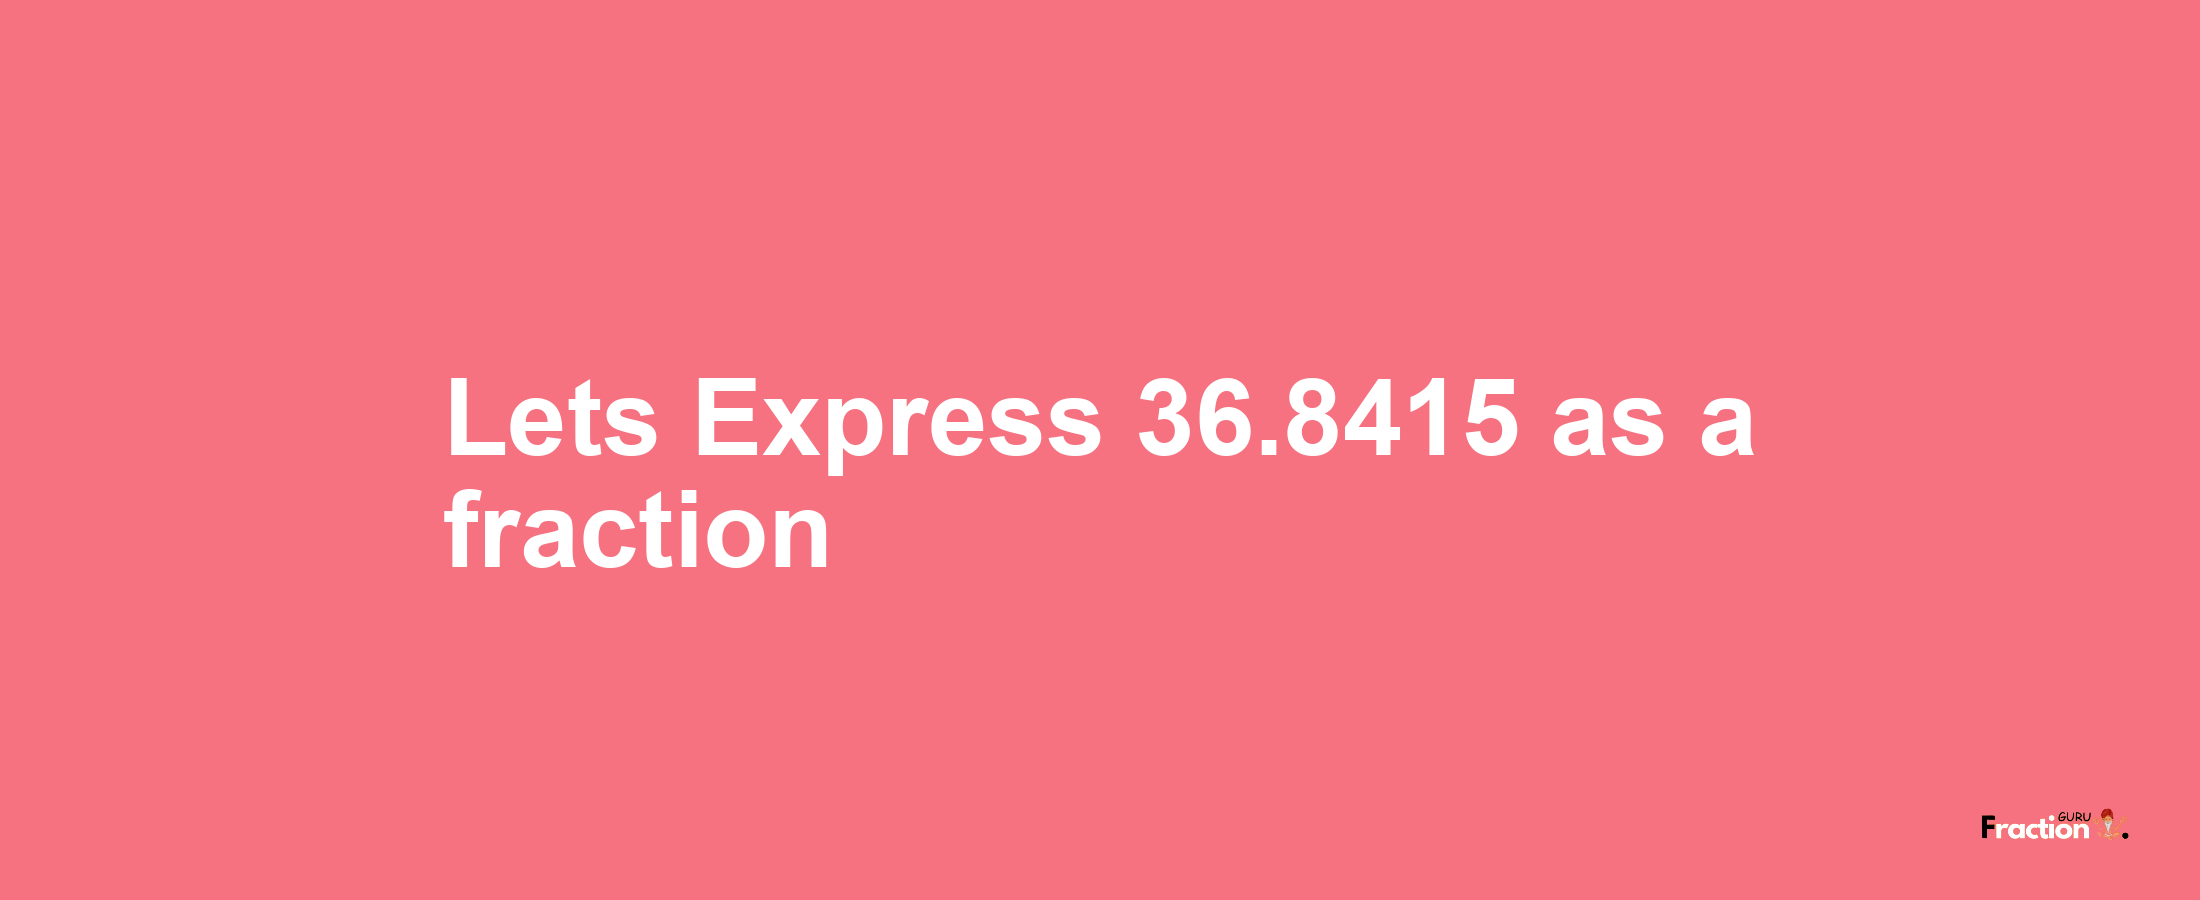 Lets Express 36.8415 as afraction